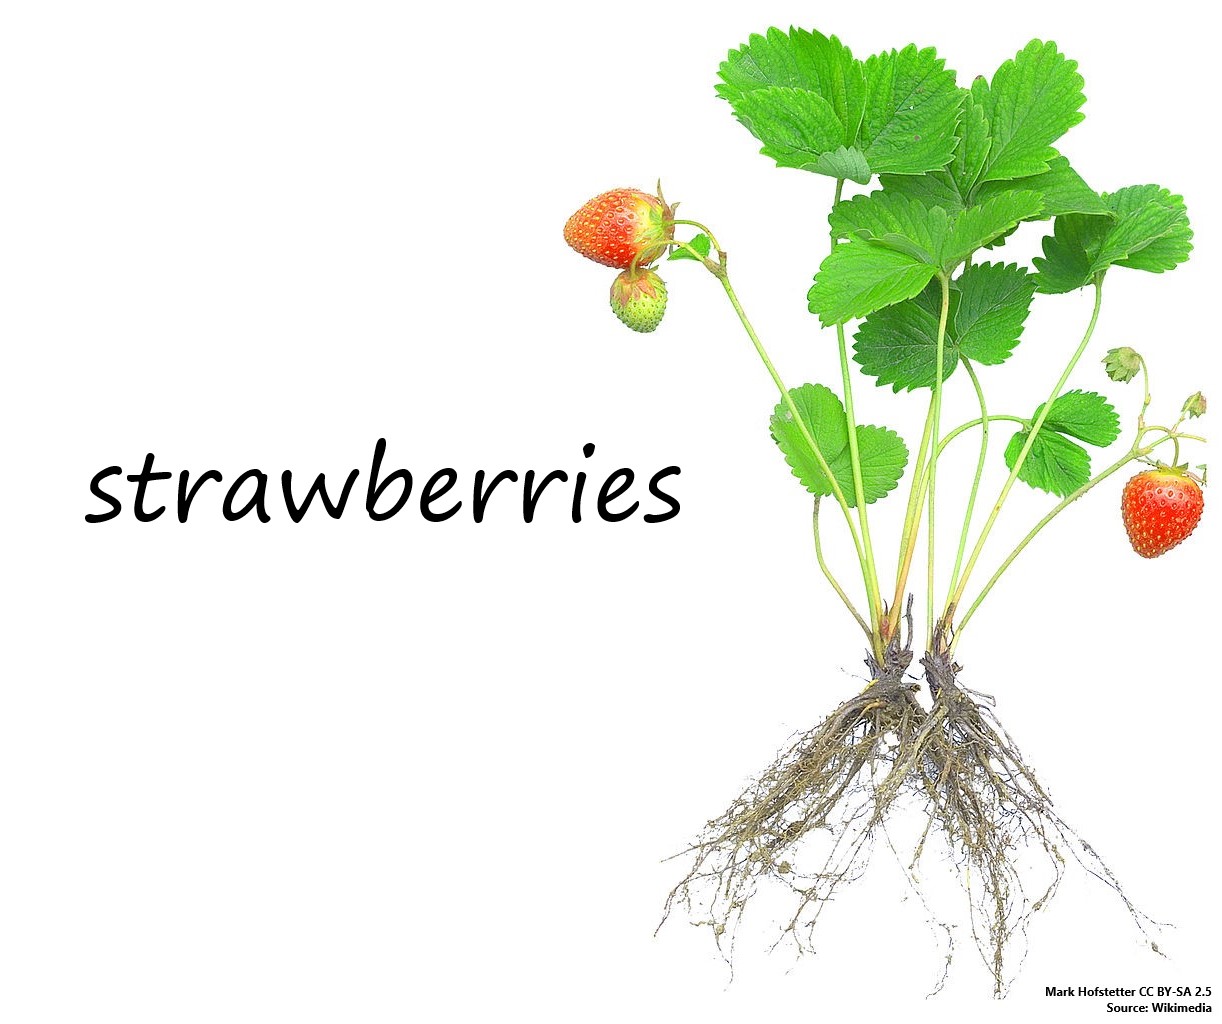 Strawberry plant with label